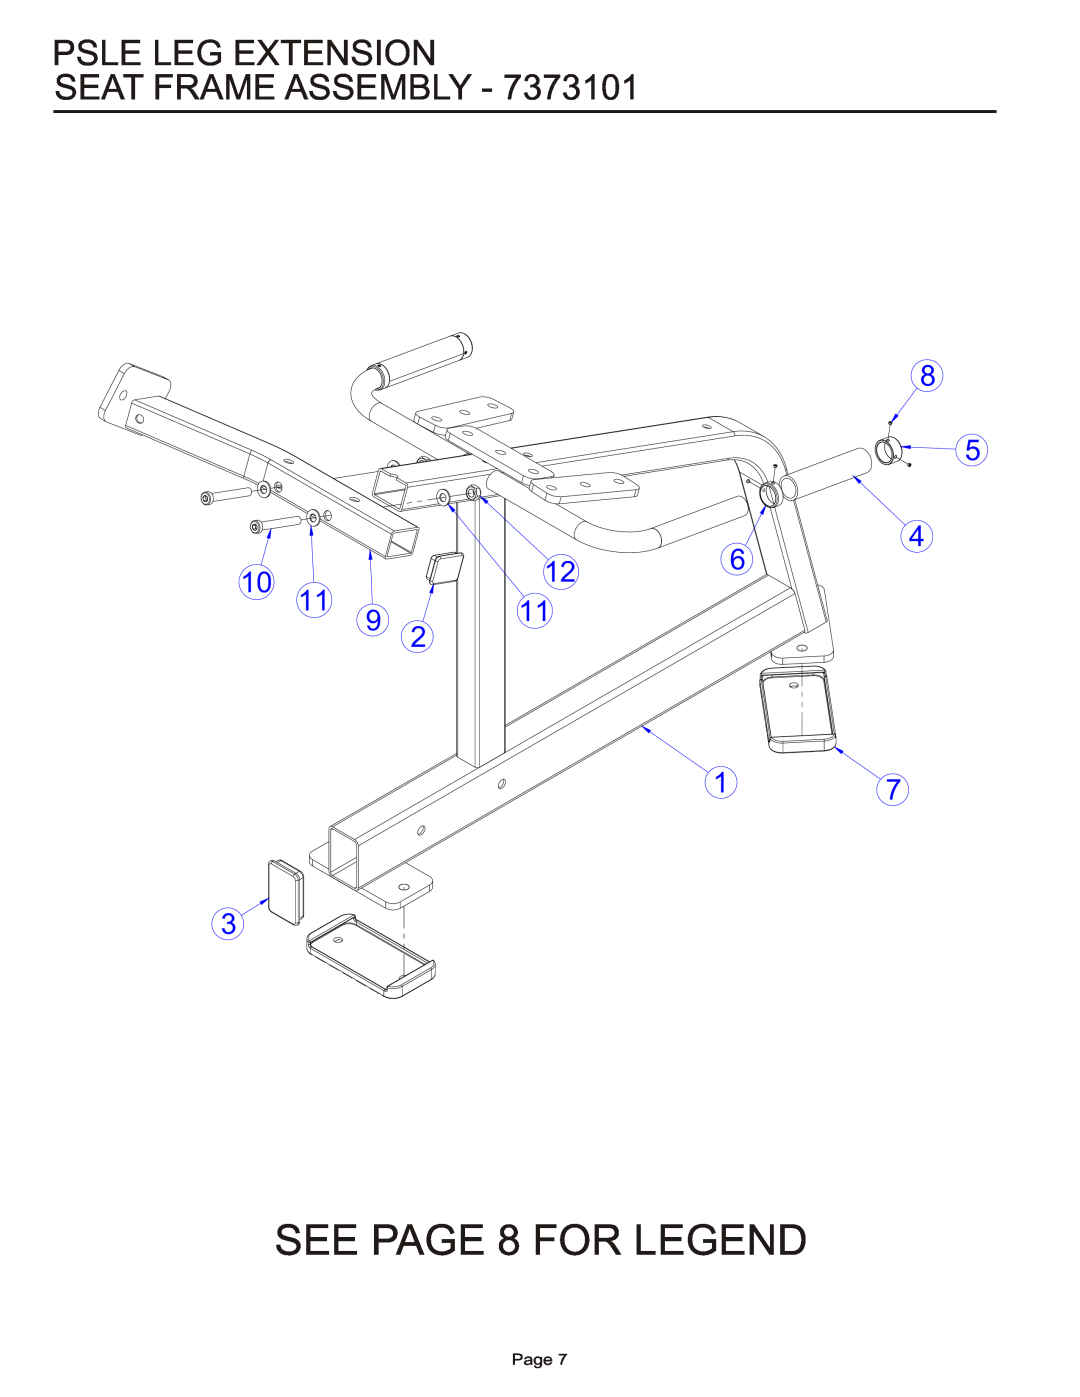 Life Fitness PSLE manual SEE PAGE 8 FOR LEGEND, Psle Leg Extension Seat Frame Assembly, Page 